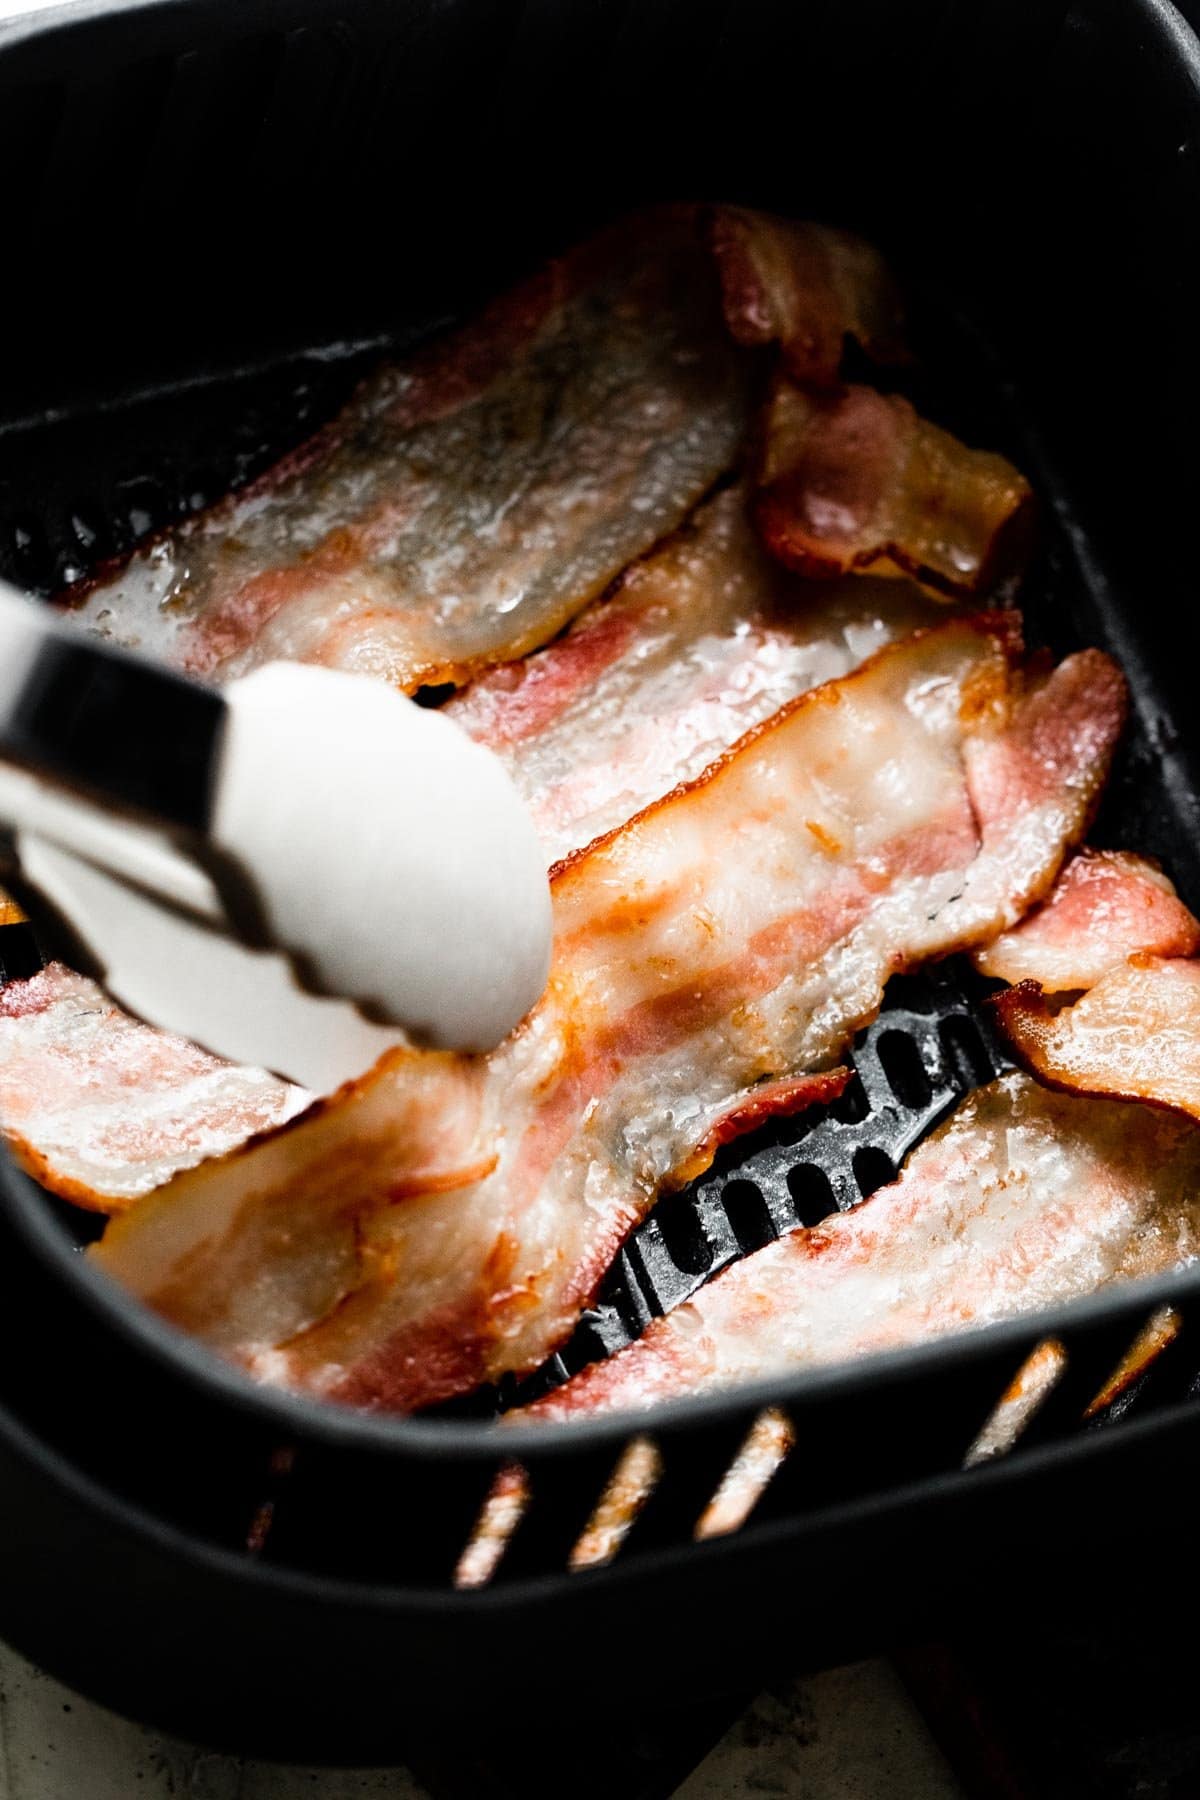 a pair of tongs turning over a slice of bacon.